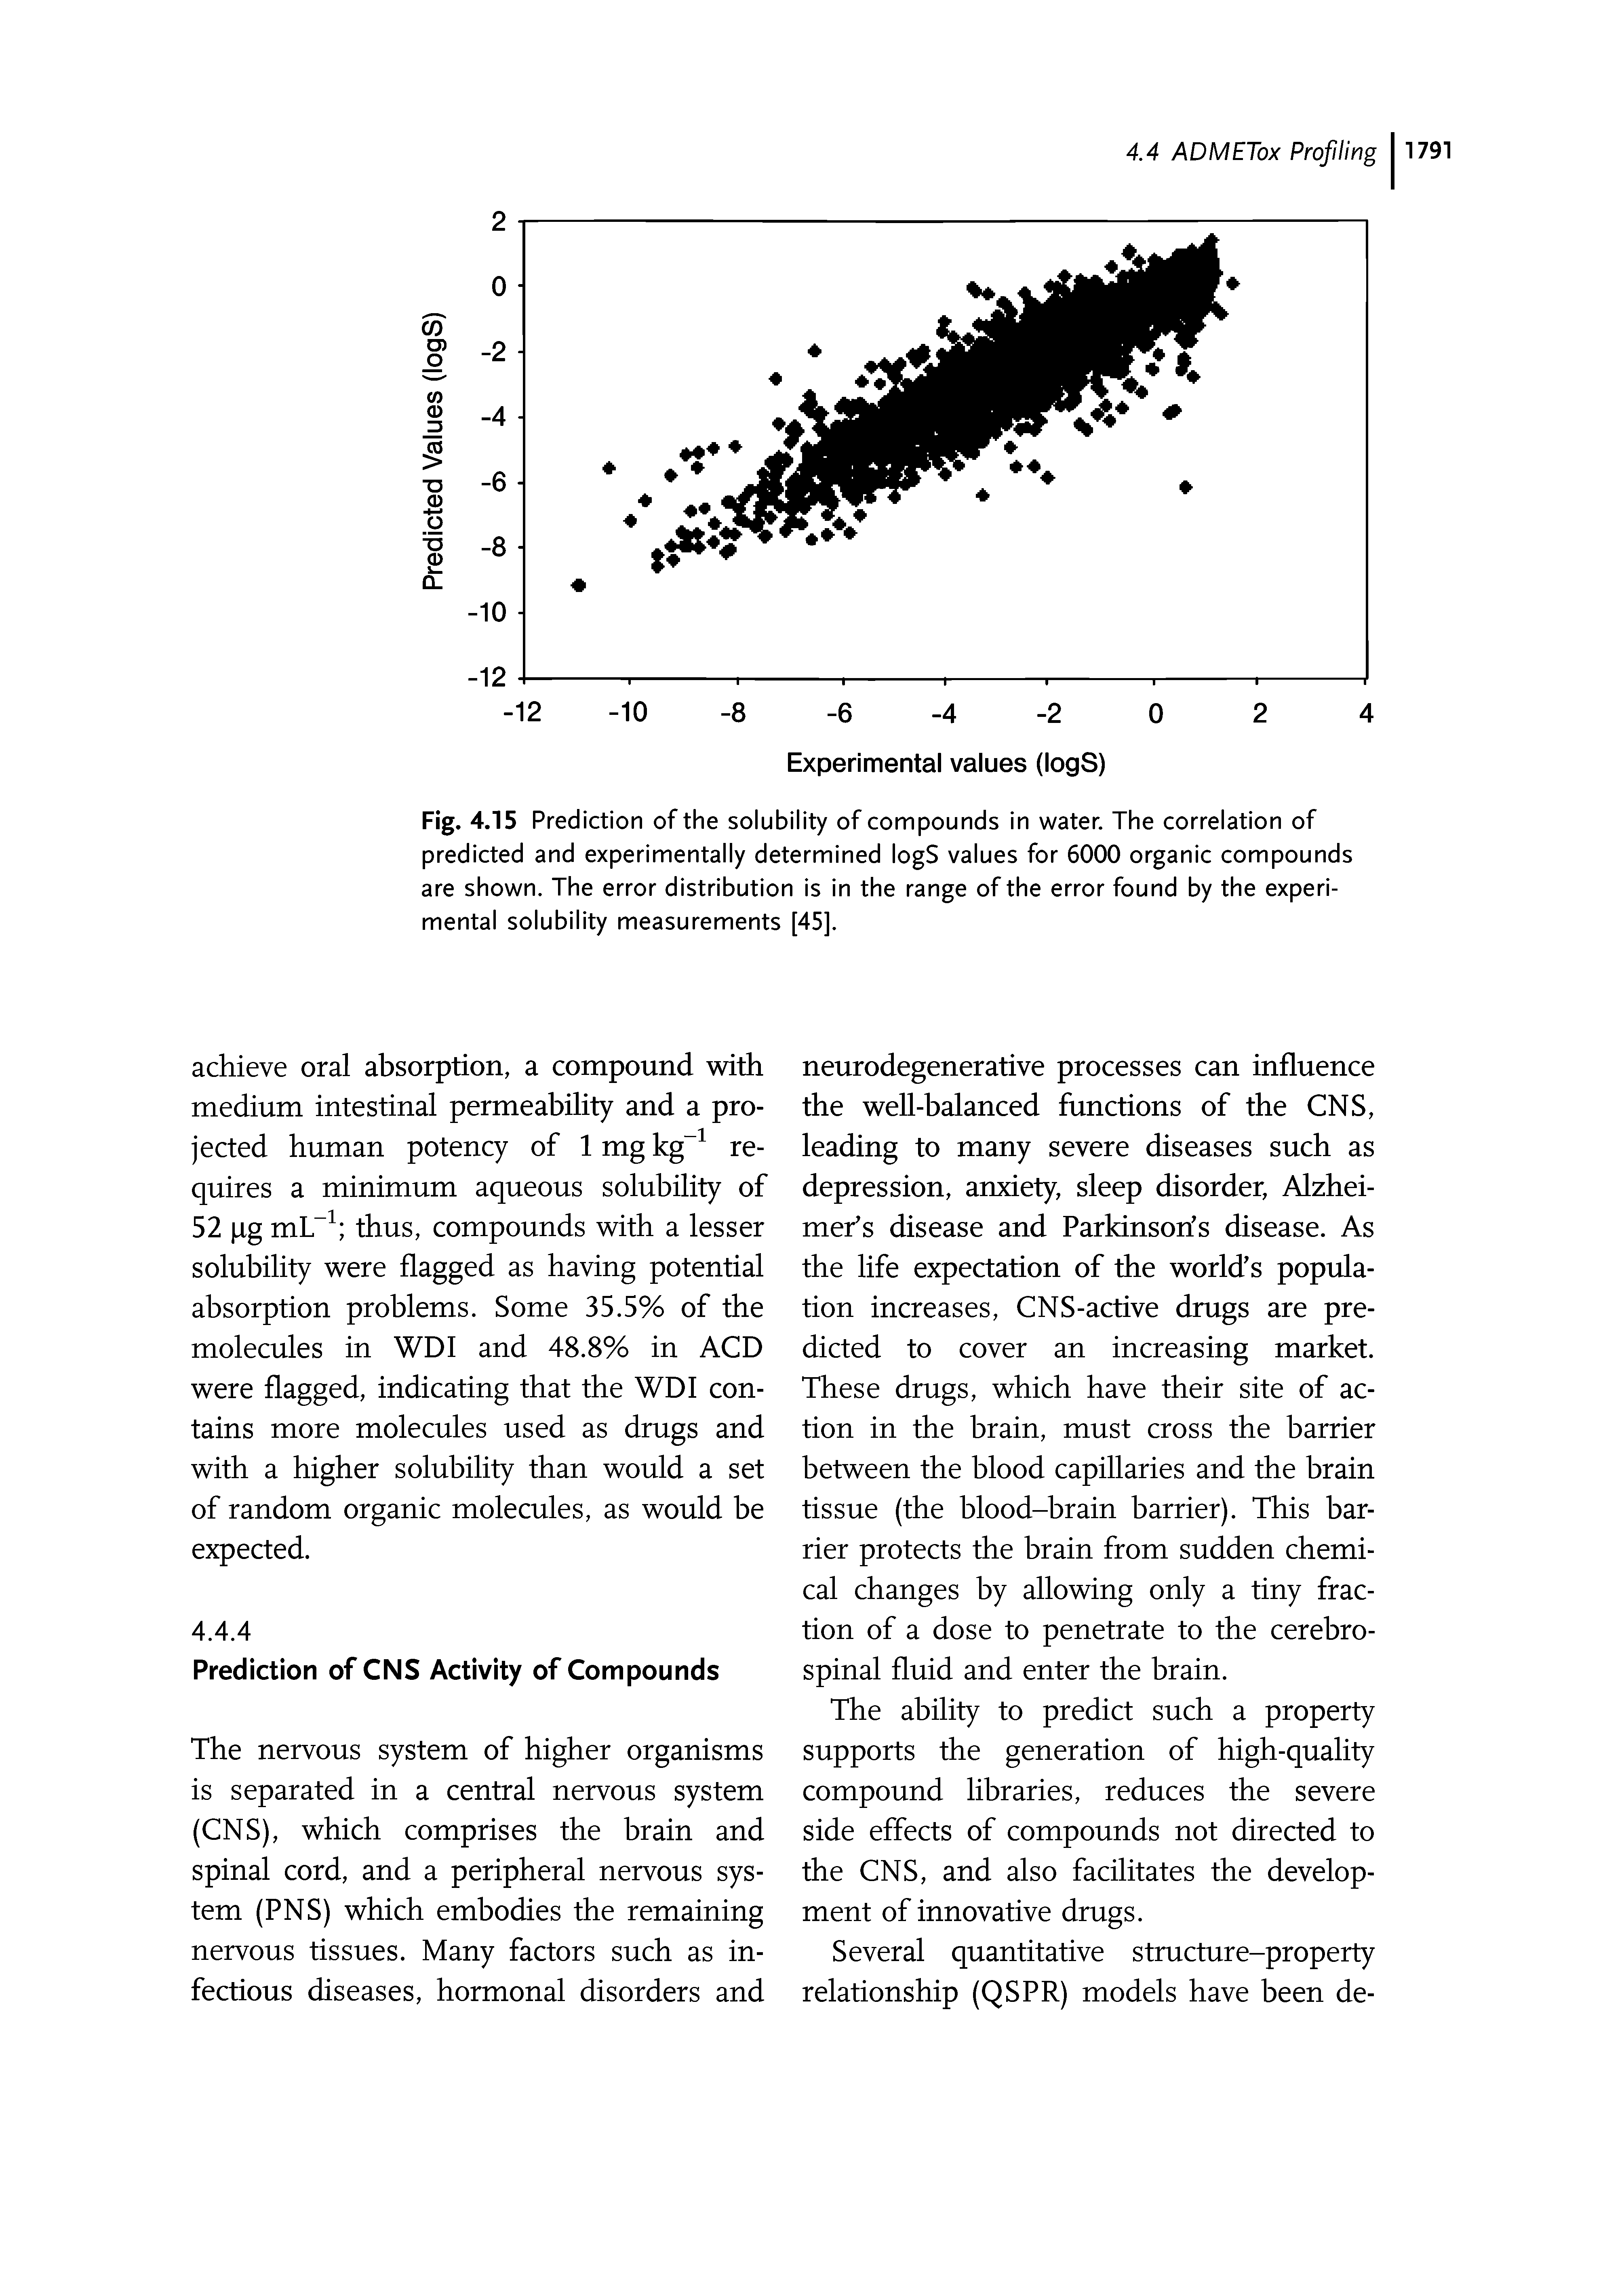 Fig. 4.15 Prediction of the solubility of compounds in water. The correlation of predicted and experimentally determined logS values for 6000 organic compounds are shown. The error distribution is in the range of the error found by the experimental solubility measurements [45].